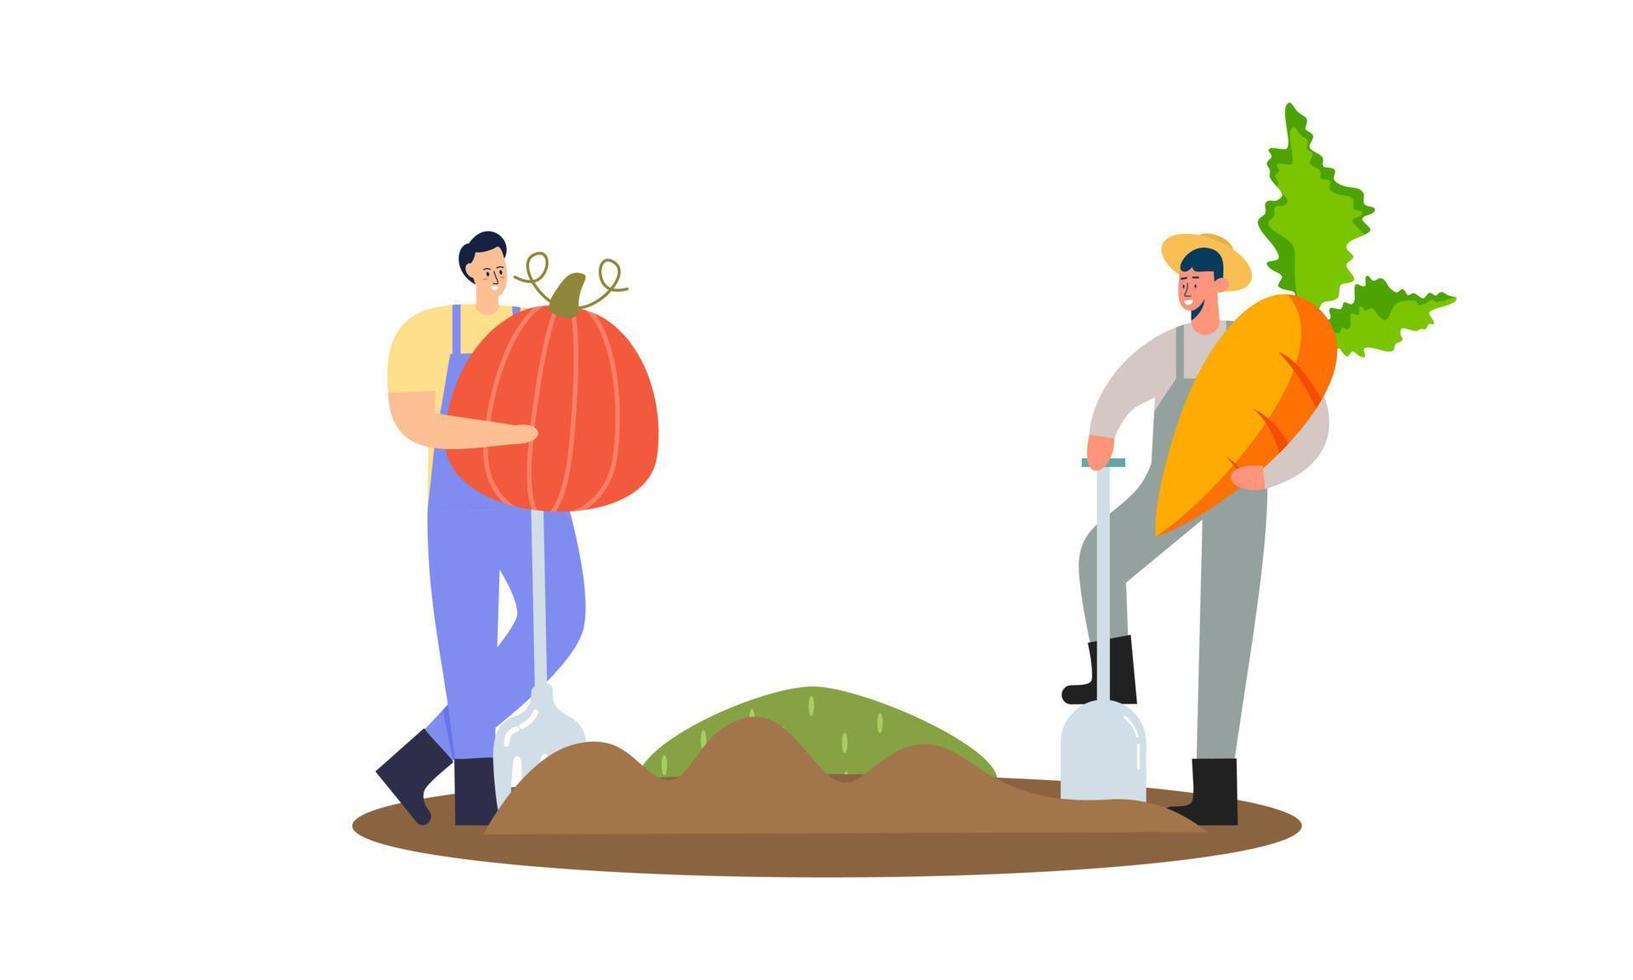 Tiny farmer and selling fresh farm vegetables to buyer illustration concept vector